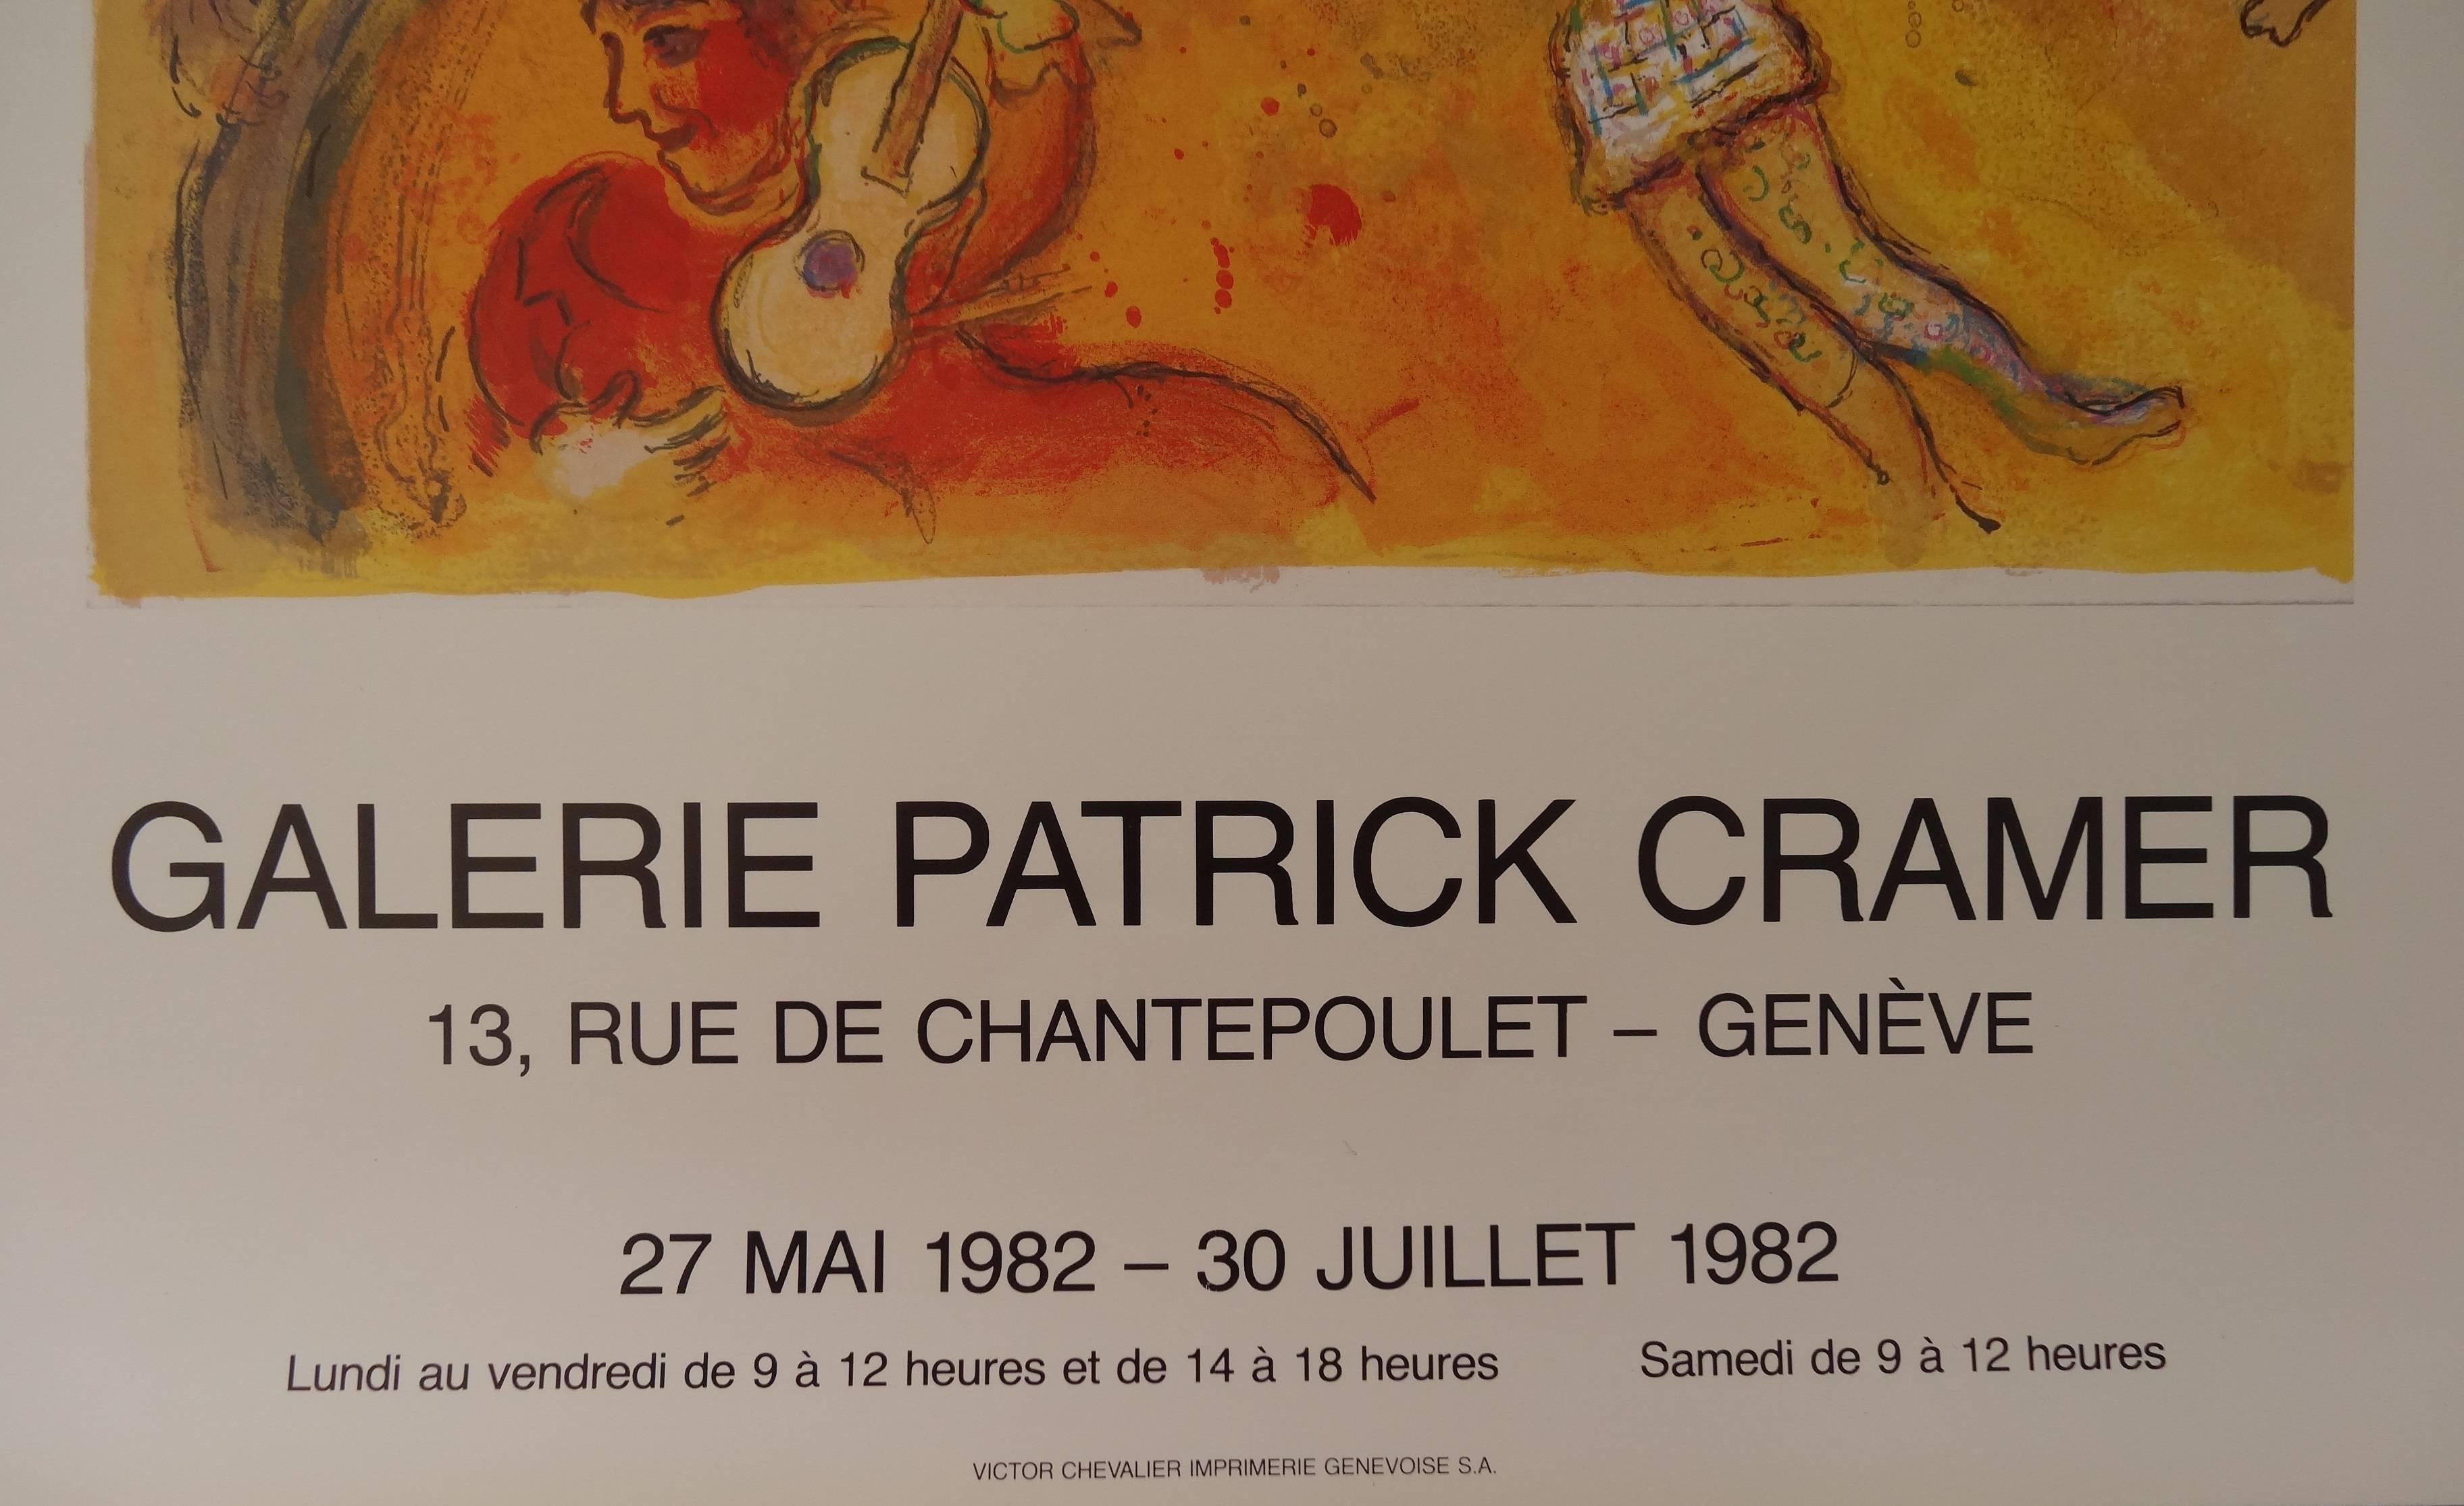 Circus - 25 illustrated books - Vintage poster - 1982 - Brown Figurative Print by Marc Chagall